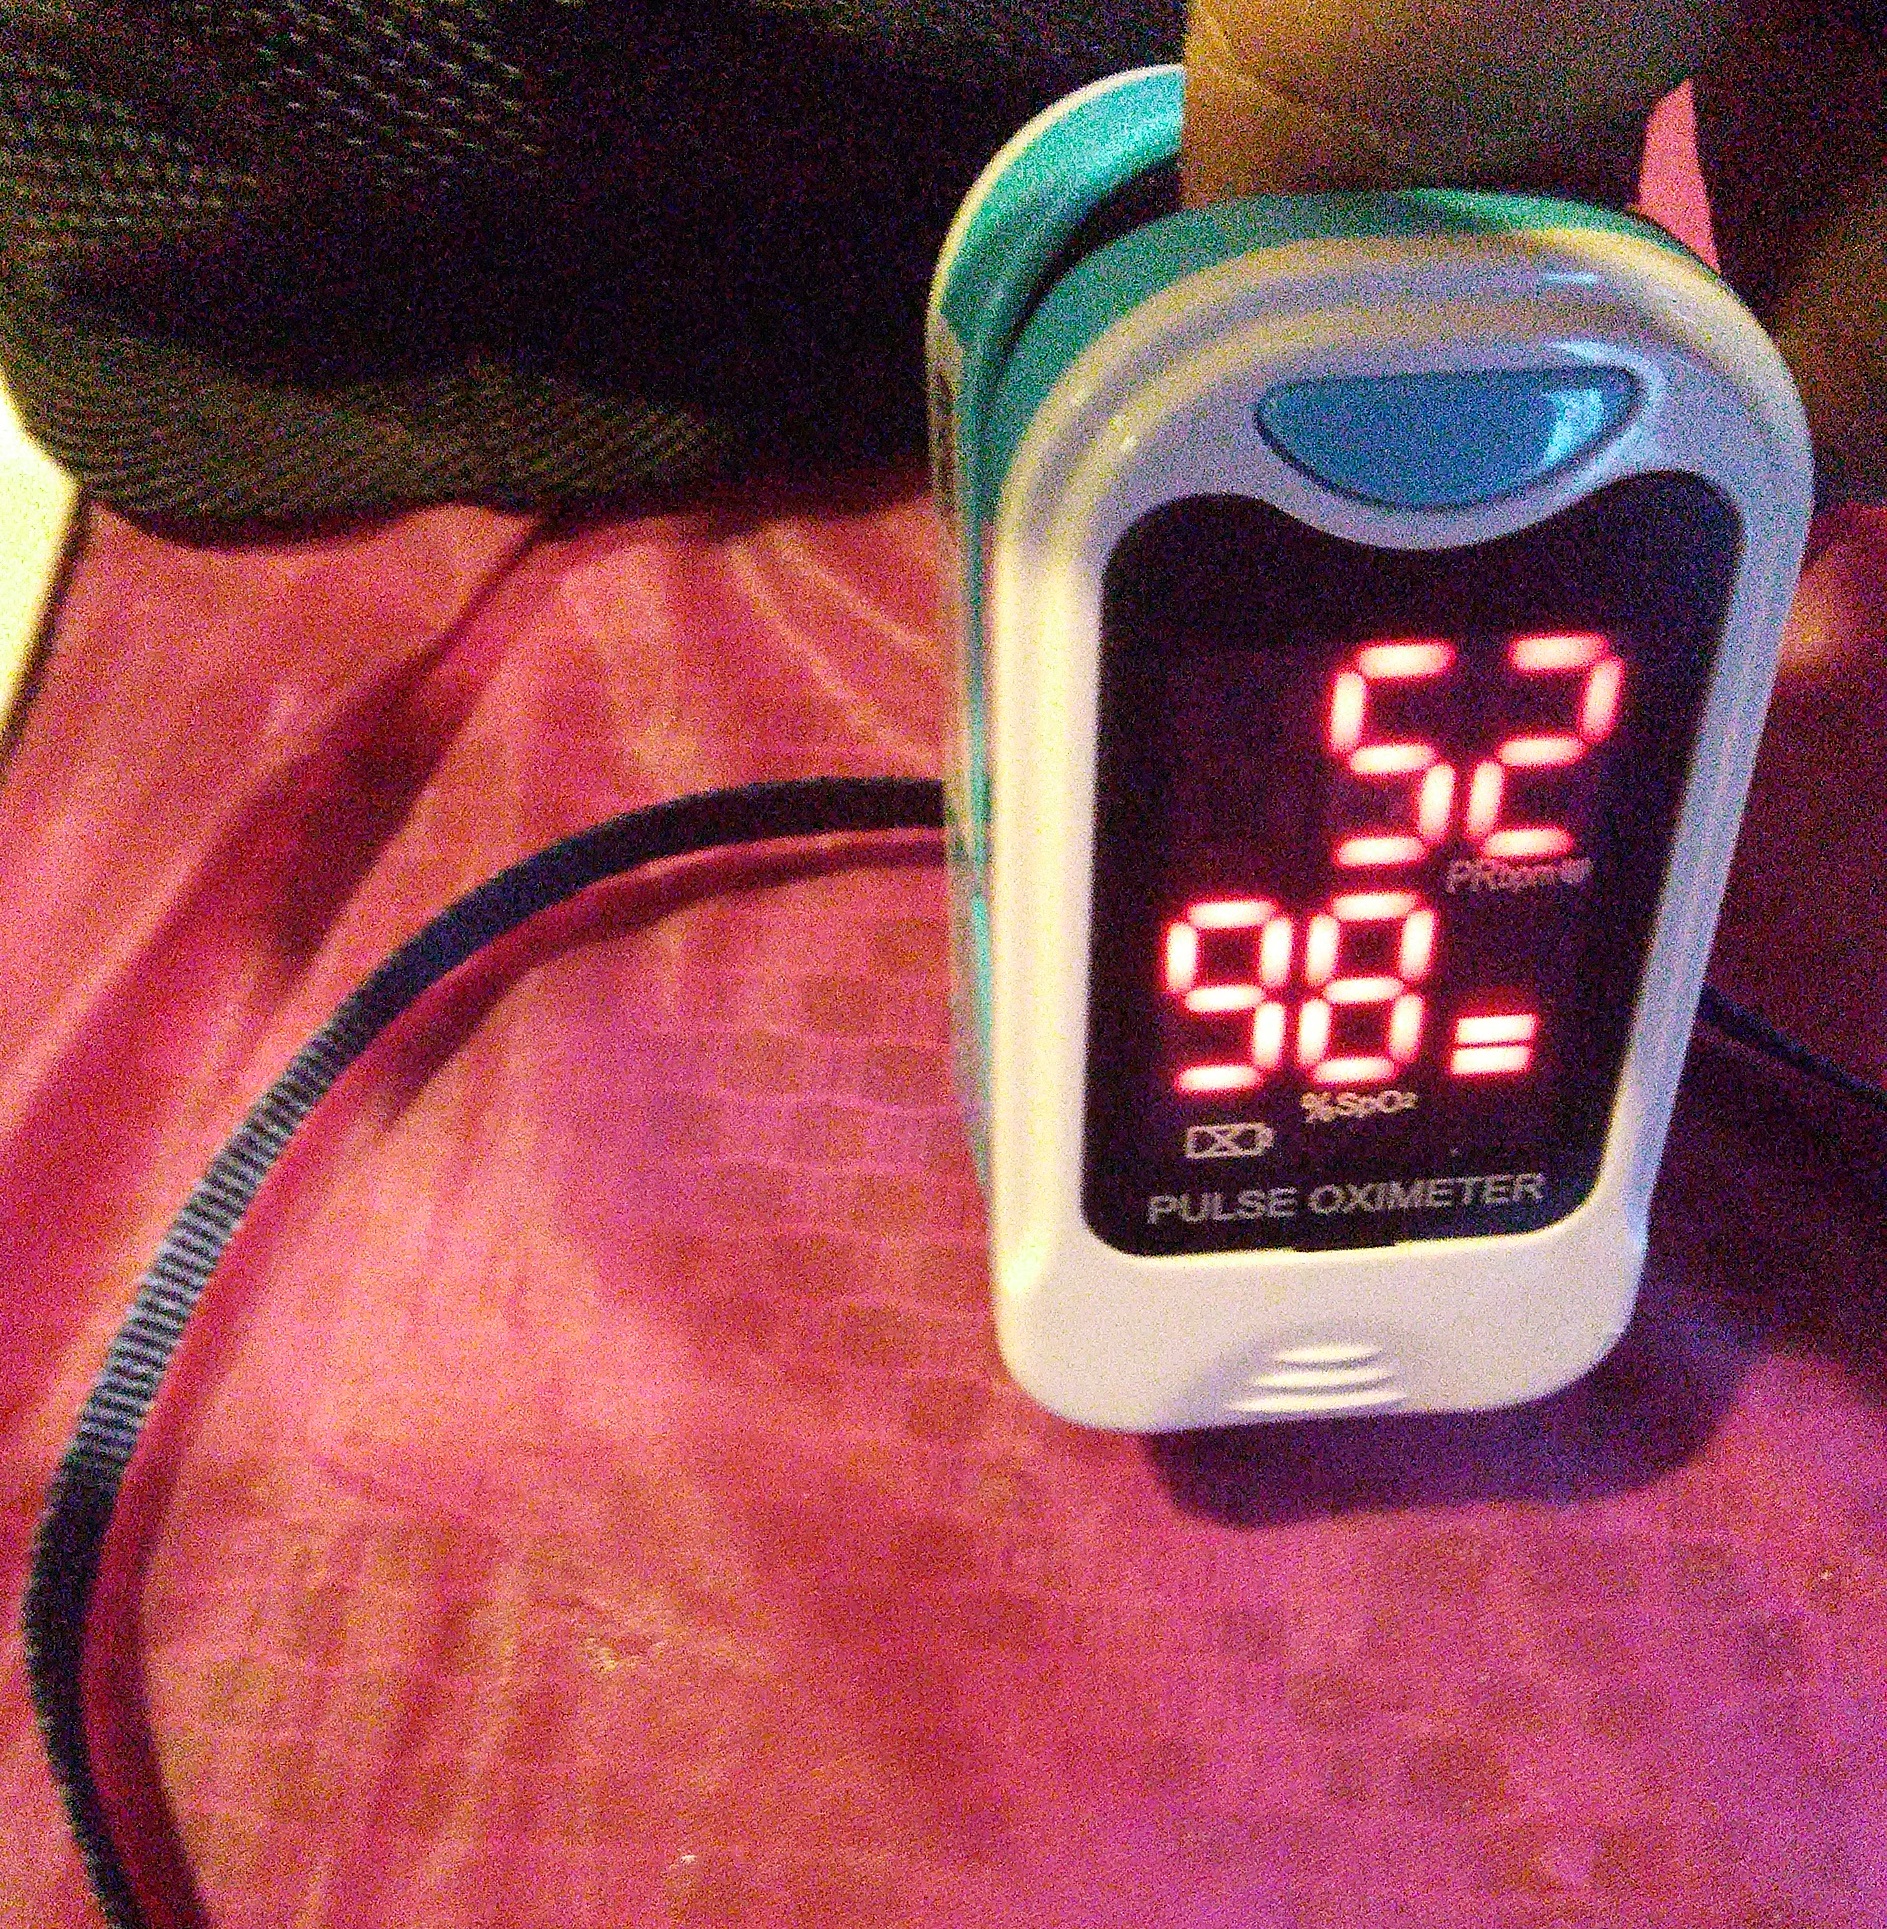 This image show a Pulse Oximeter with 98% oxygen saturation level and pulse/HR of 52 bpm.